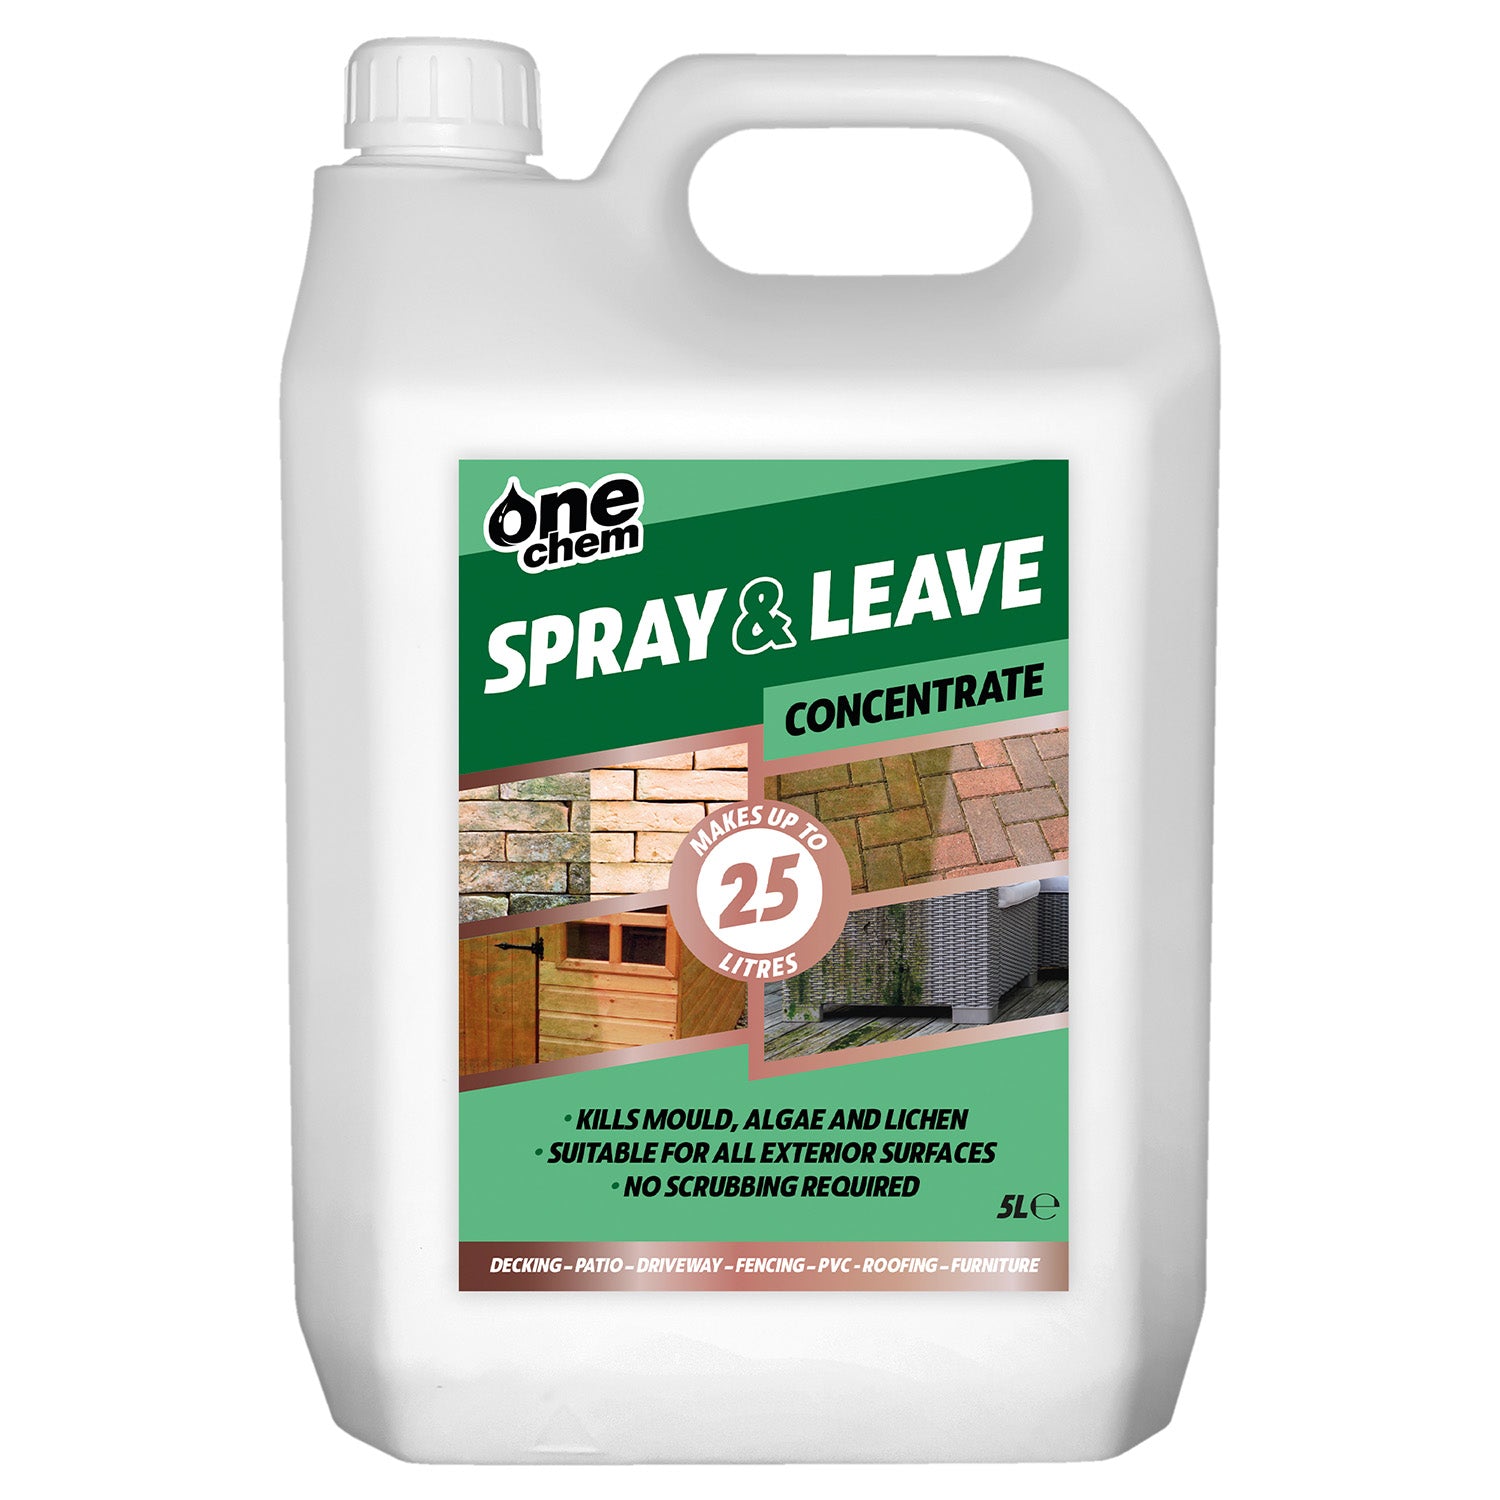 One Chem Spray and Leave 5 Litre Concentrate